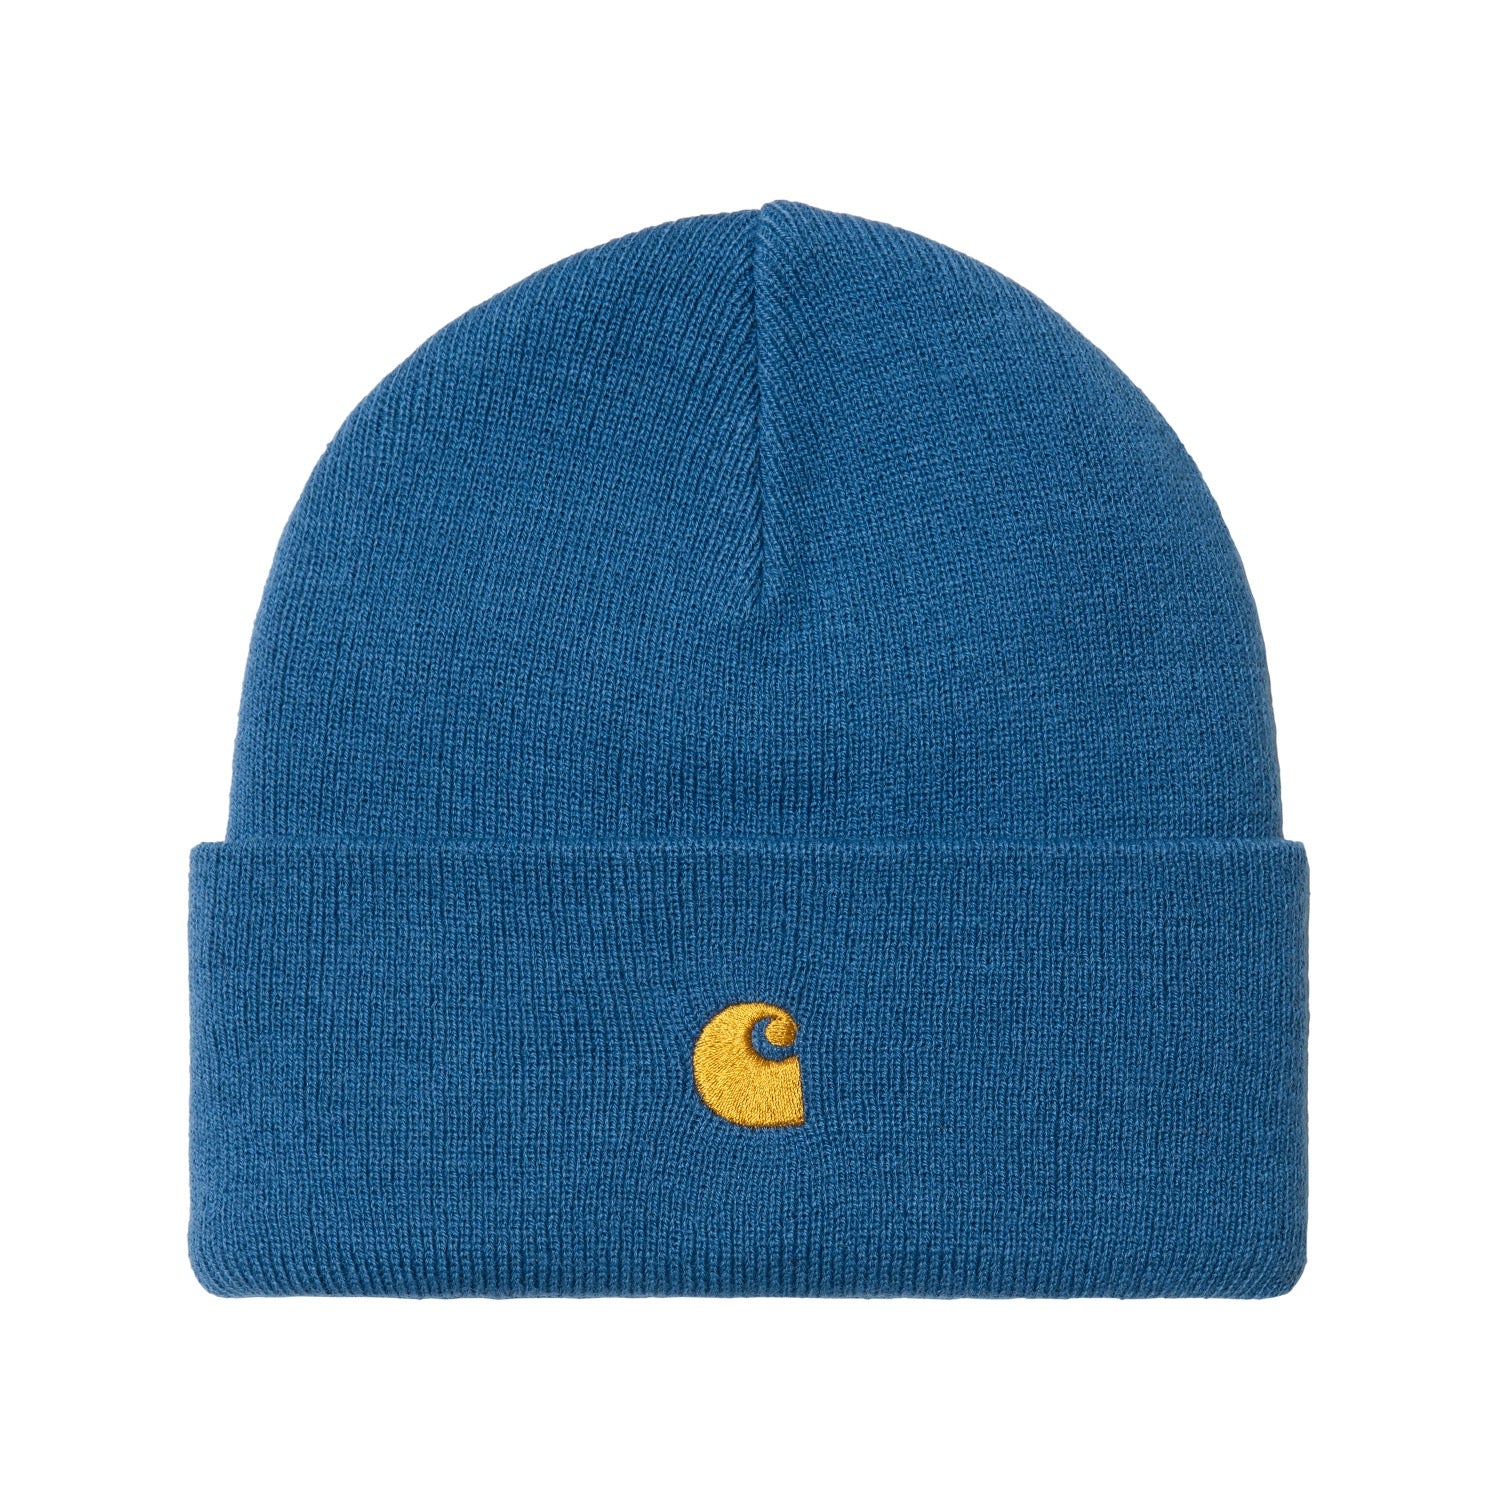 CHASE BEANIE - Acapulco / Gold